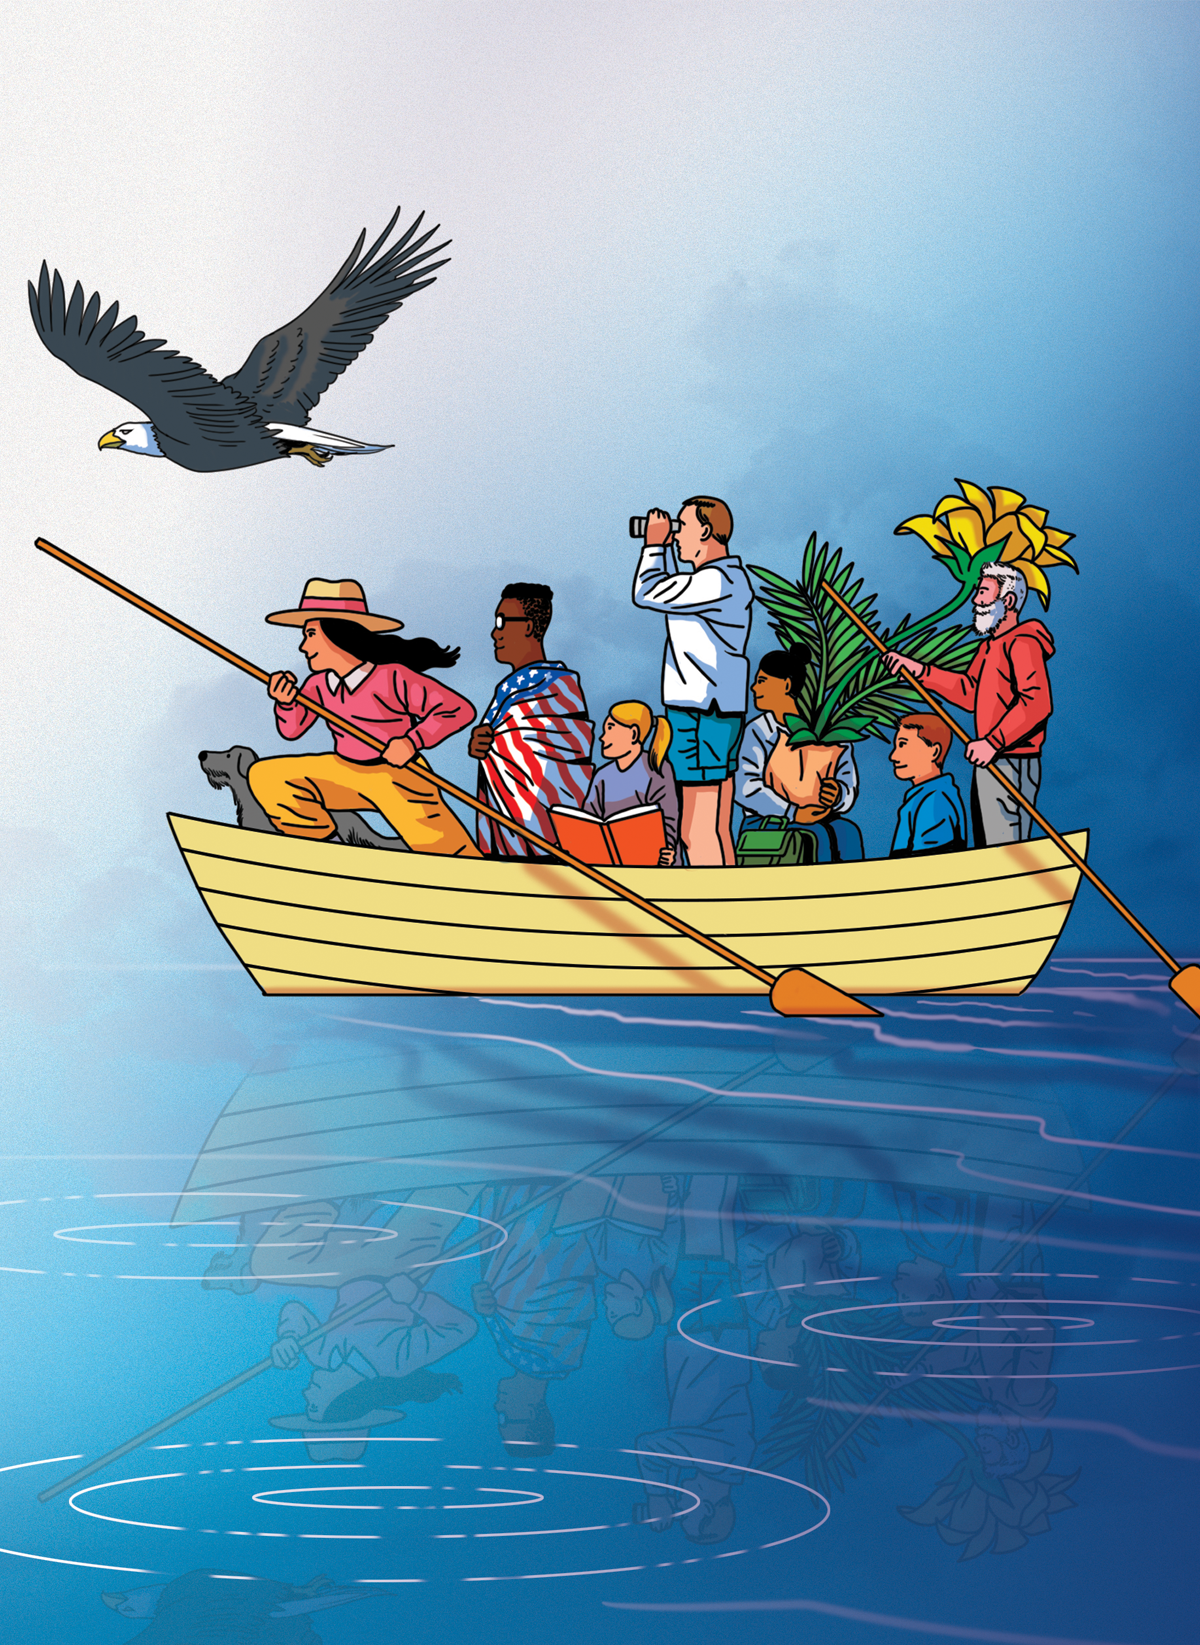 Illustration shows a rowboat full of people of different races, with an eagle flying overhead.